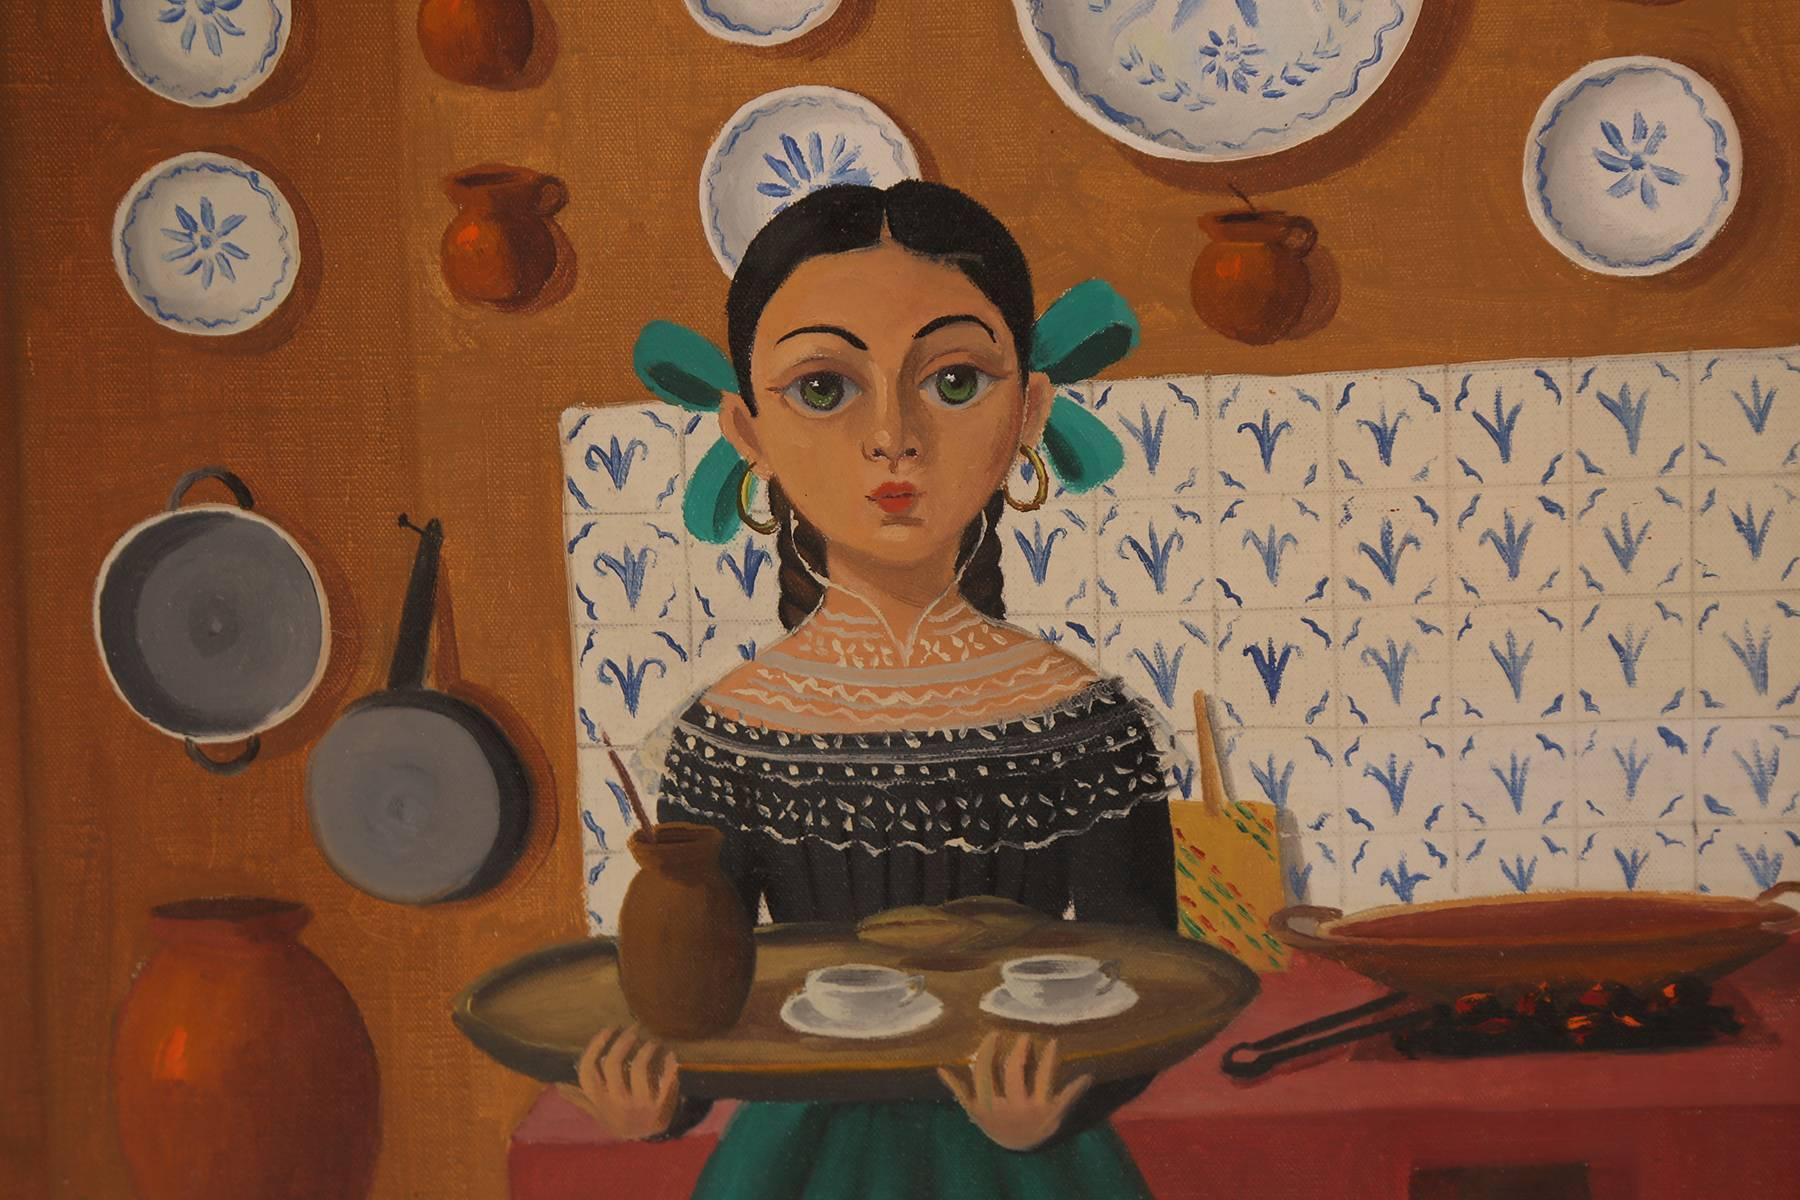 Oil on board painting signed Lois circa early 1960s. This work was purchased in Mexico City in the early 1960s and portrays a fabulously period correct image of a woman in her kitchen.